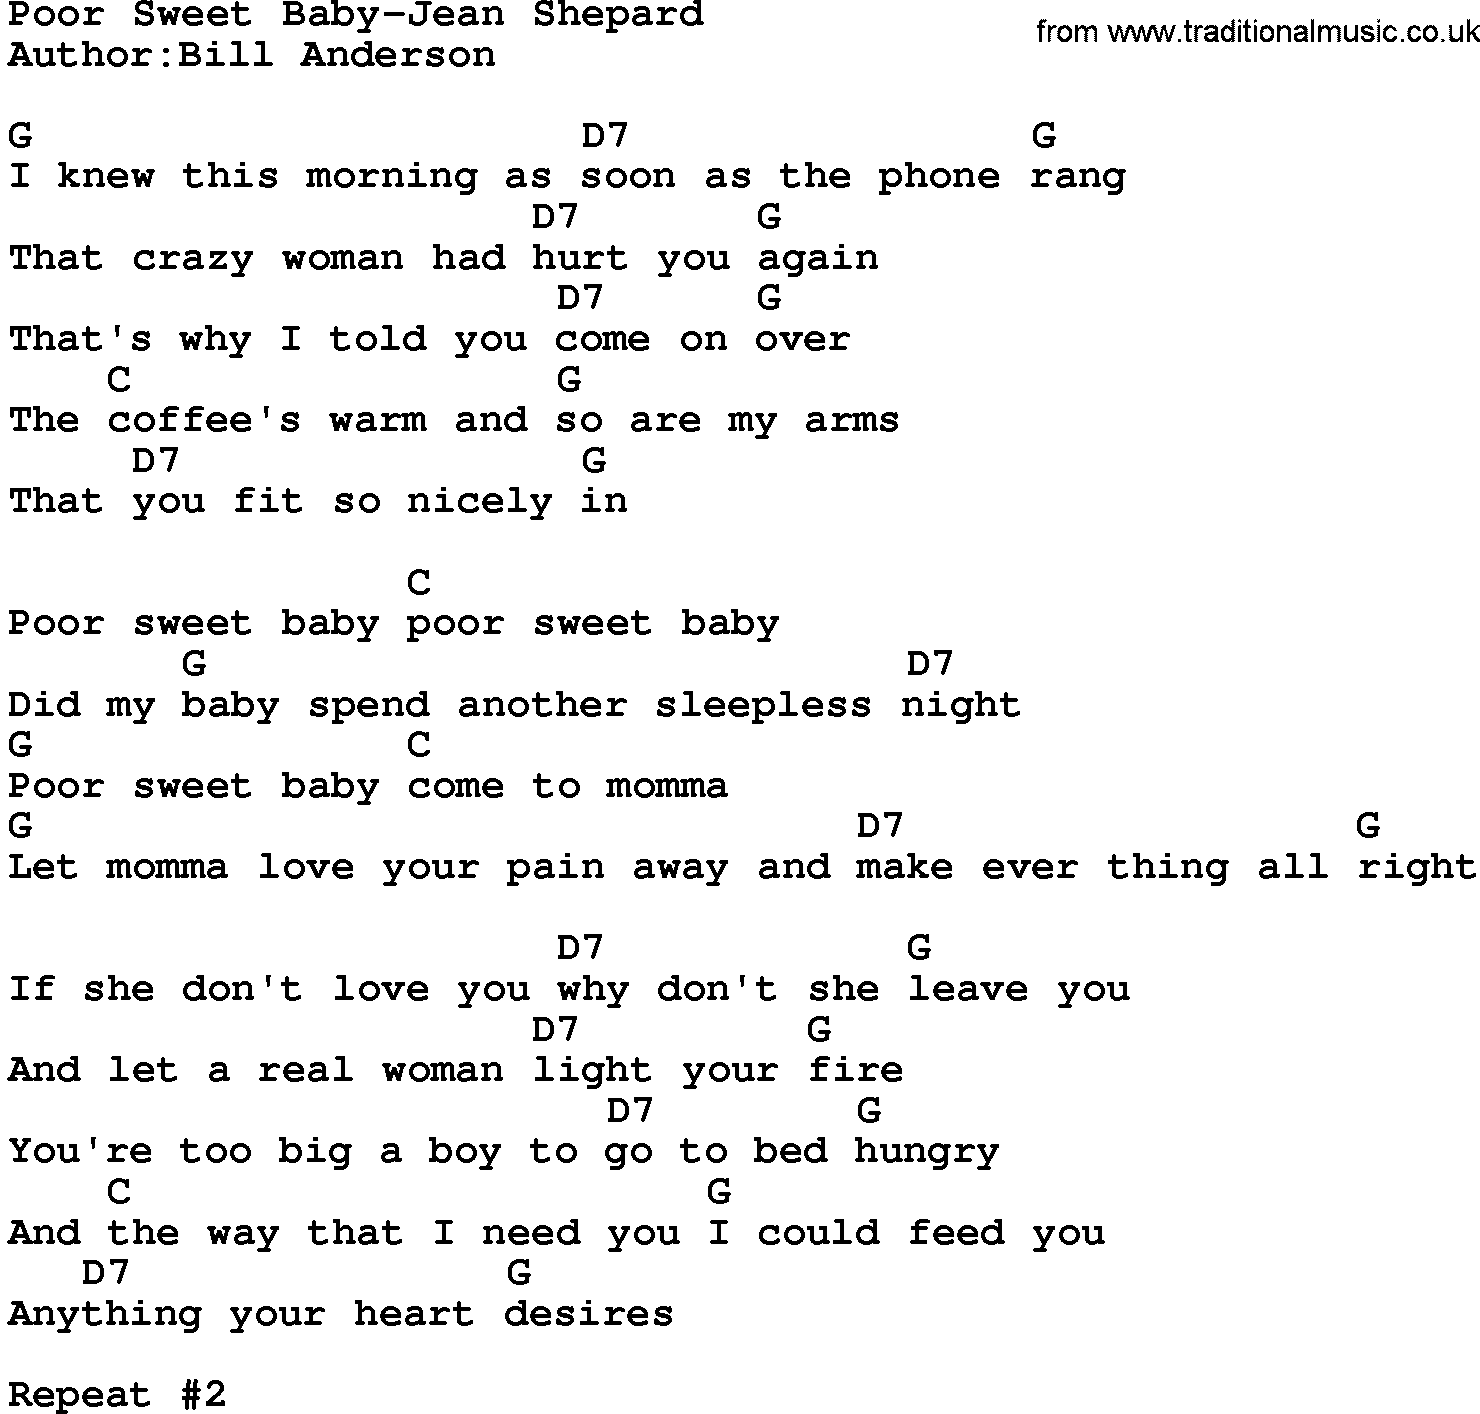 Country music song: Poor Sweet Baby-Jean Shepard lyrics and chords